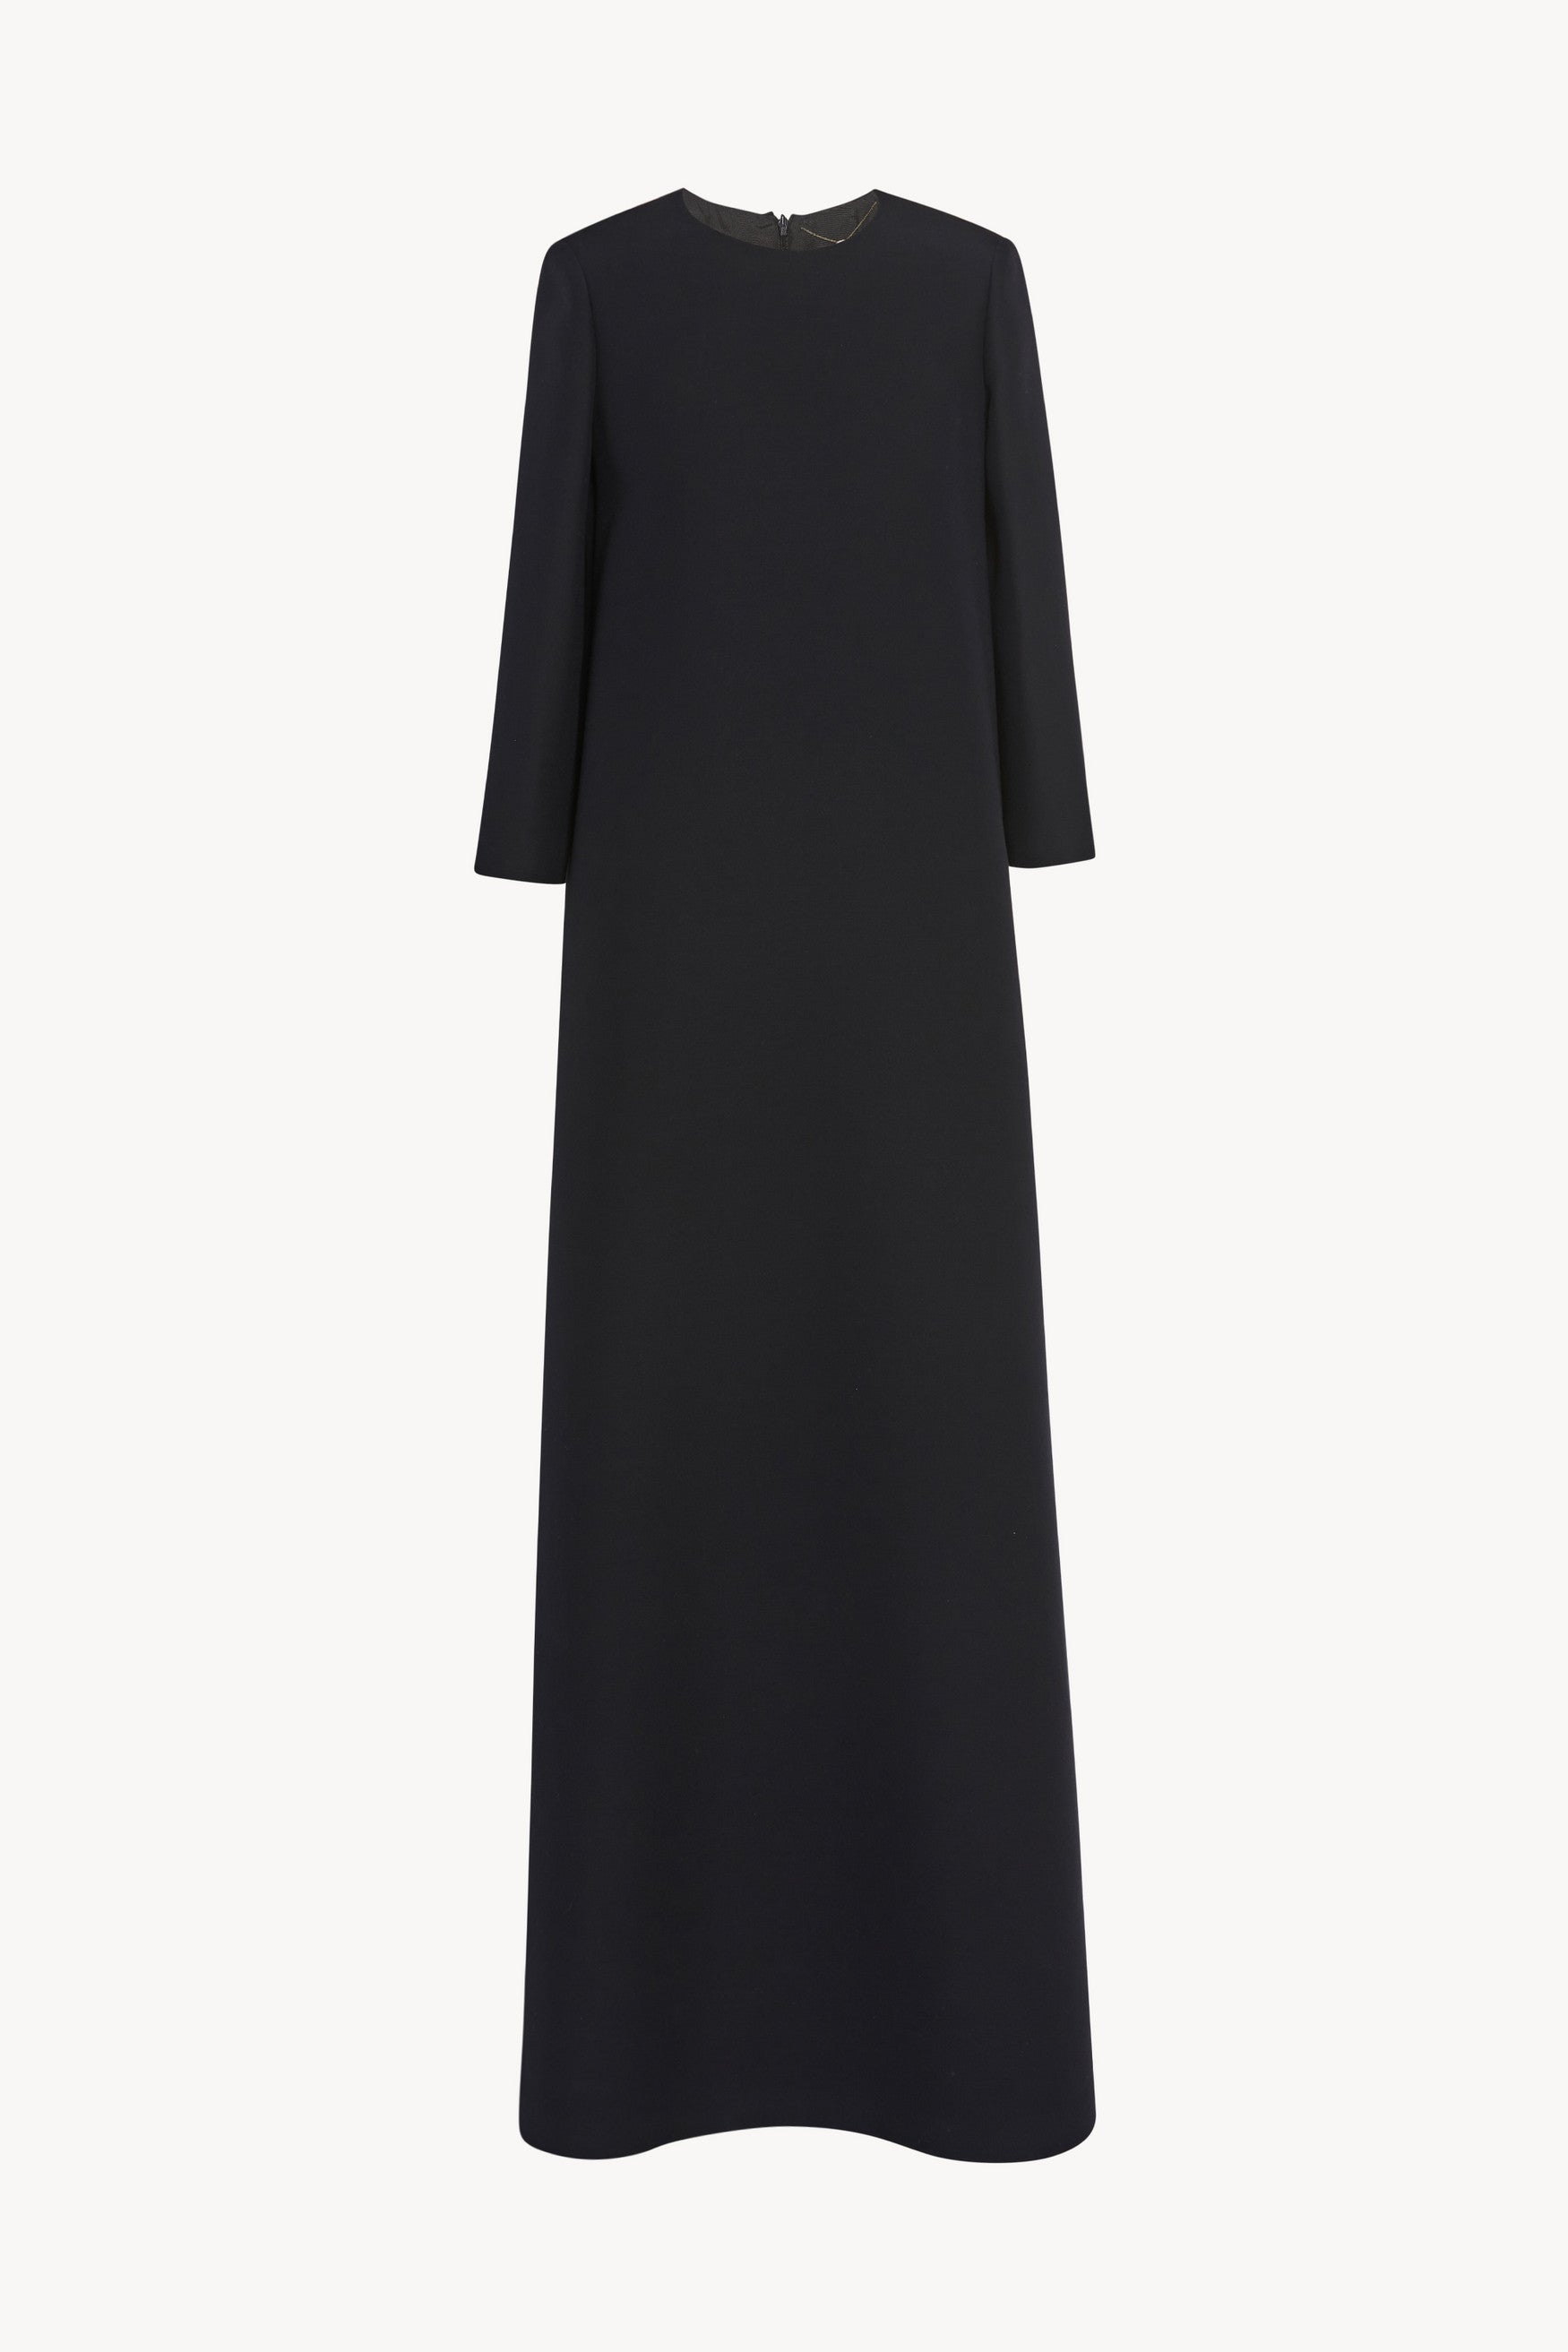 Stefos Dress Black in Wool and Silk – The Row